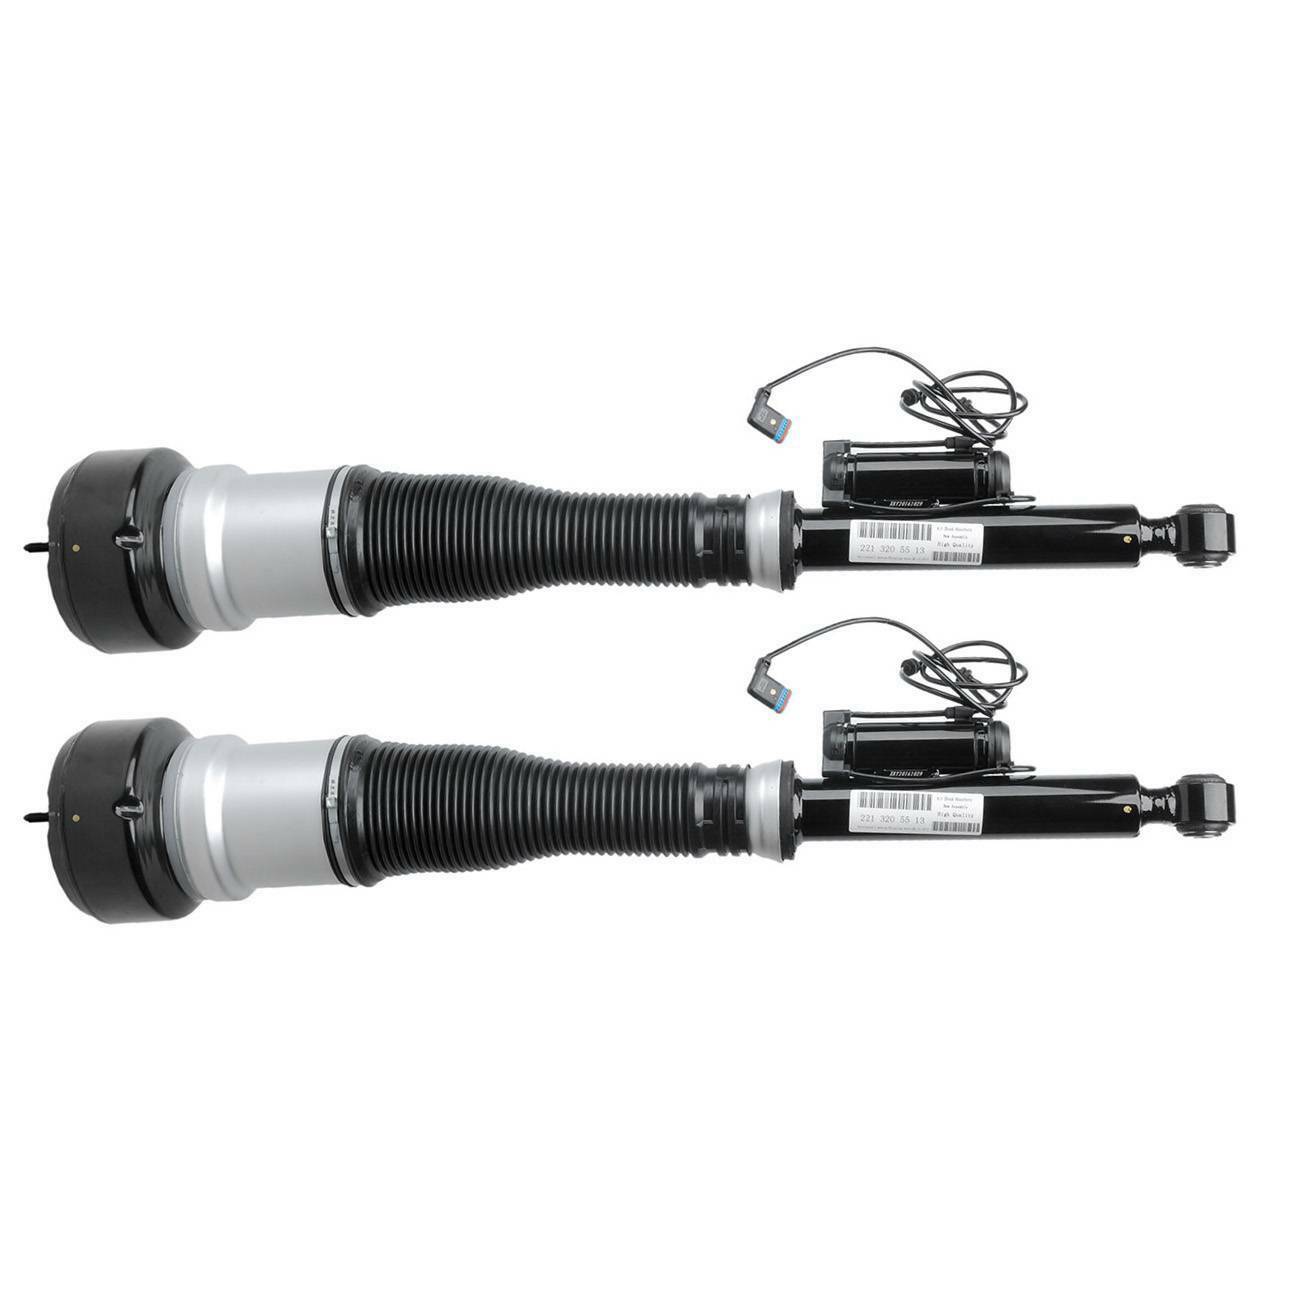 2 X Rear Air Suspension Strut for Mercedes W221 S350 C216 S400 S450 S500 4-Matic German Made